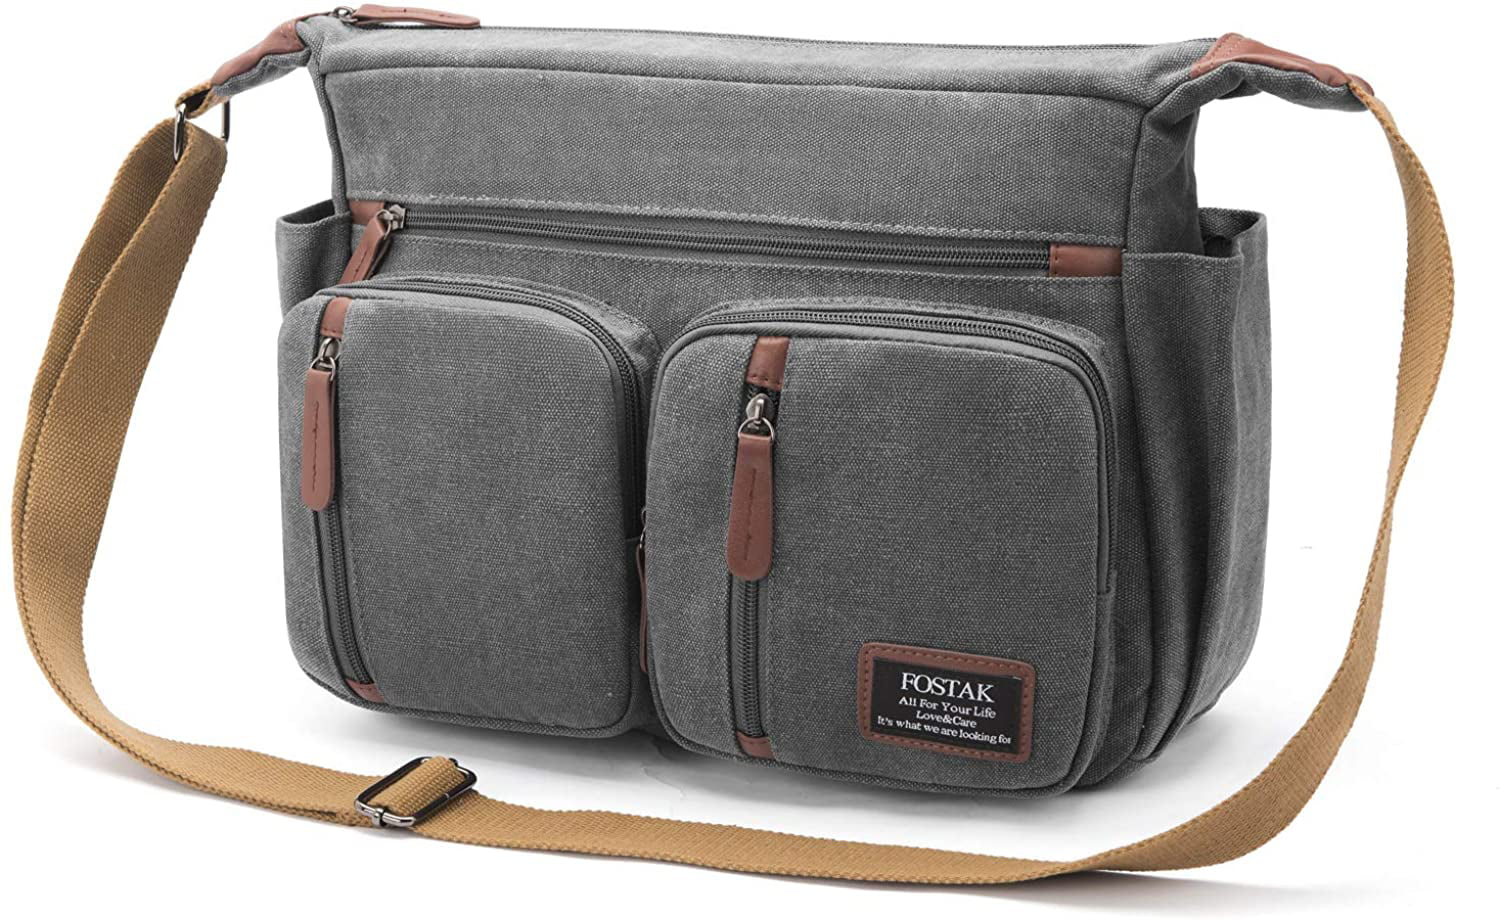 FOSTAK Messenger Bag for Men and Women Fit 13.3 Inch Laptop Multi-Pocket Shoulder Bag Padded Canvas Briefcase Lightweight School Satchel for College Work Travel and Daily Use,Grey 